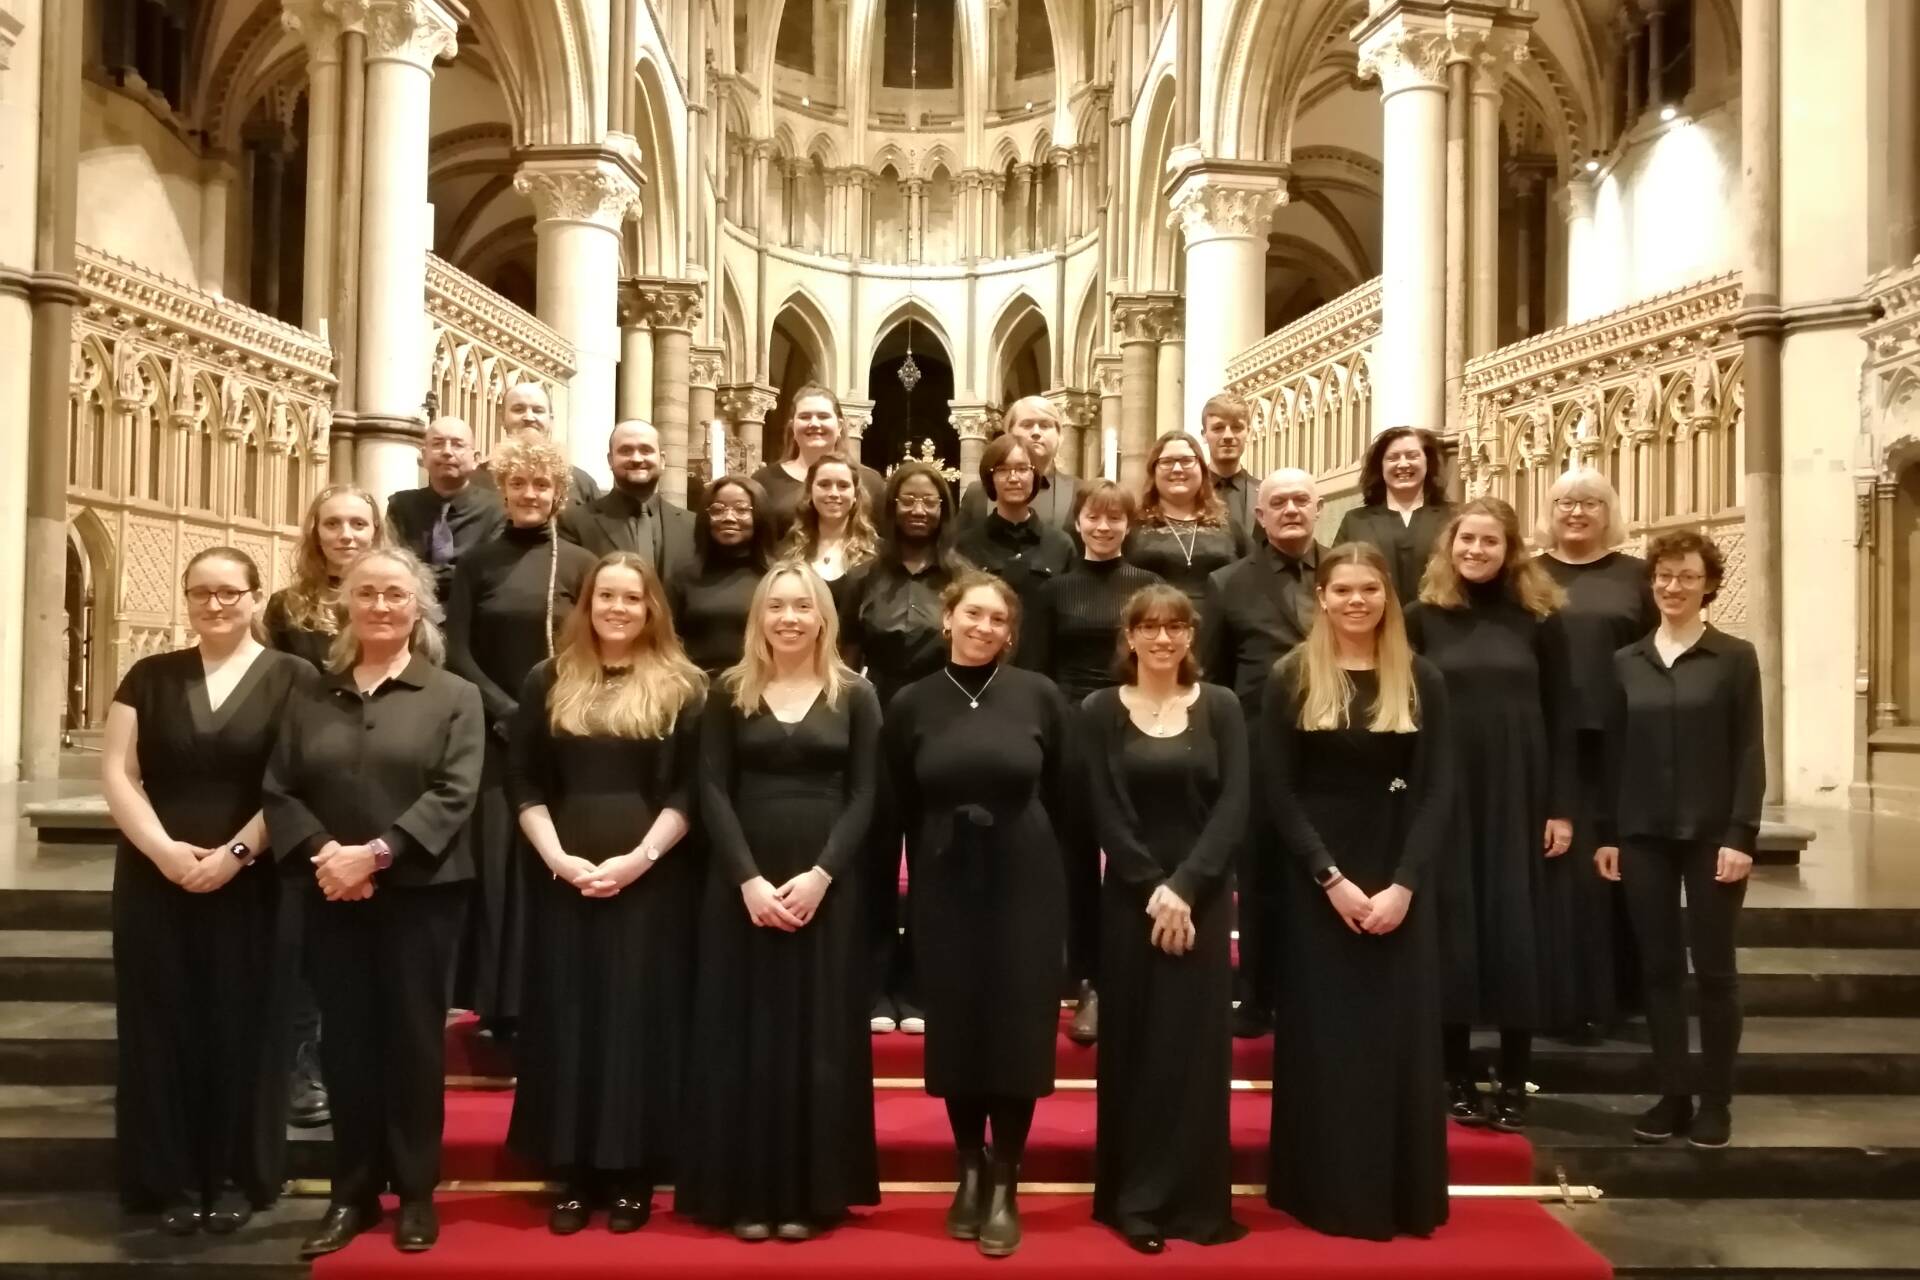 Choir standing on red-carpeted steps wearing formal black in Canterbury Cathedral